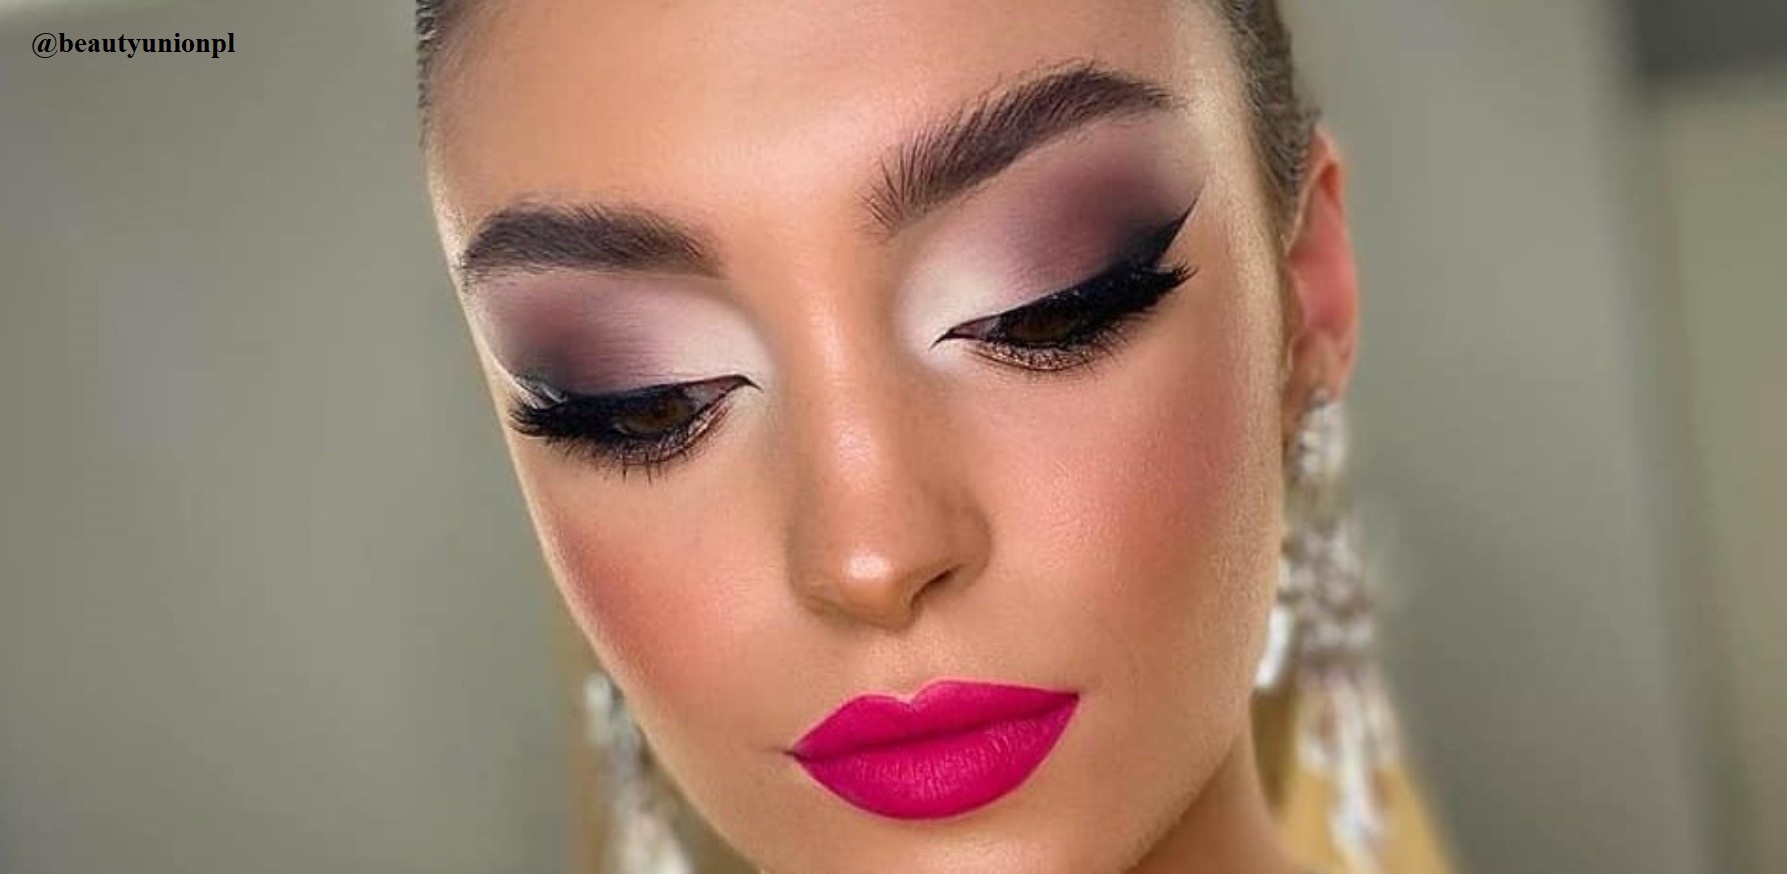 Neon Lips Is The Super Glamorous Trend That Every Girl Should Try.f